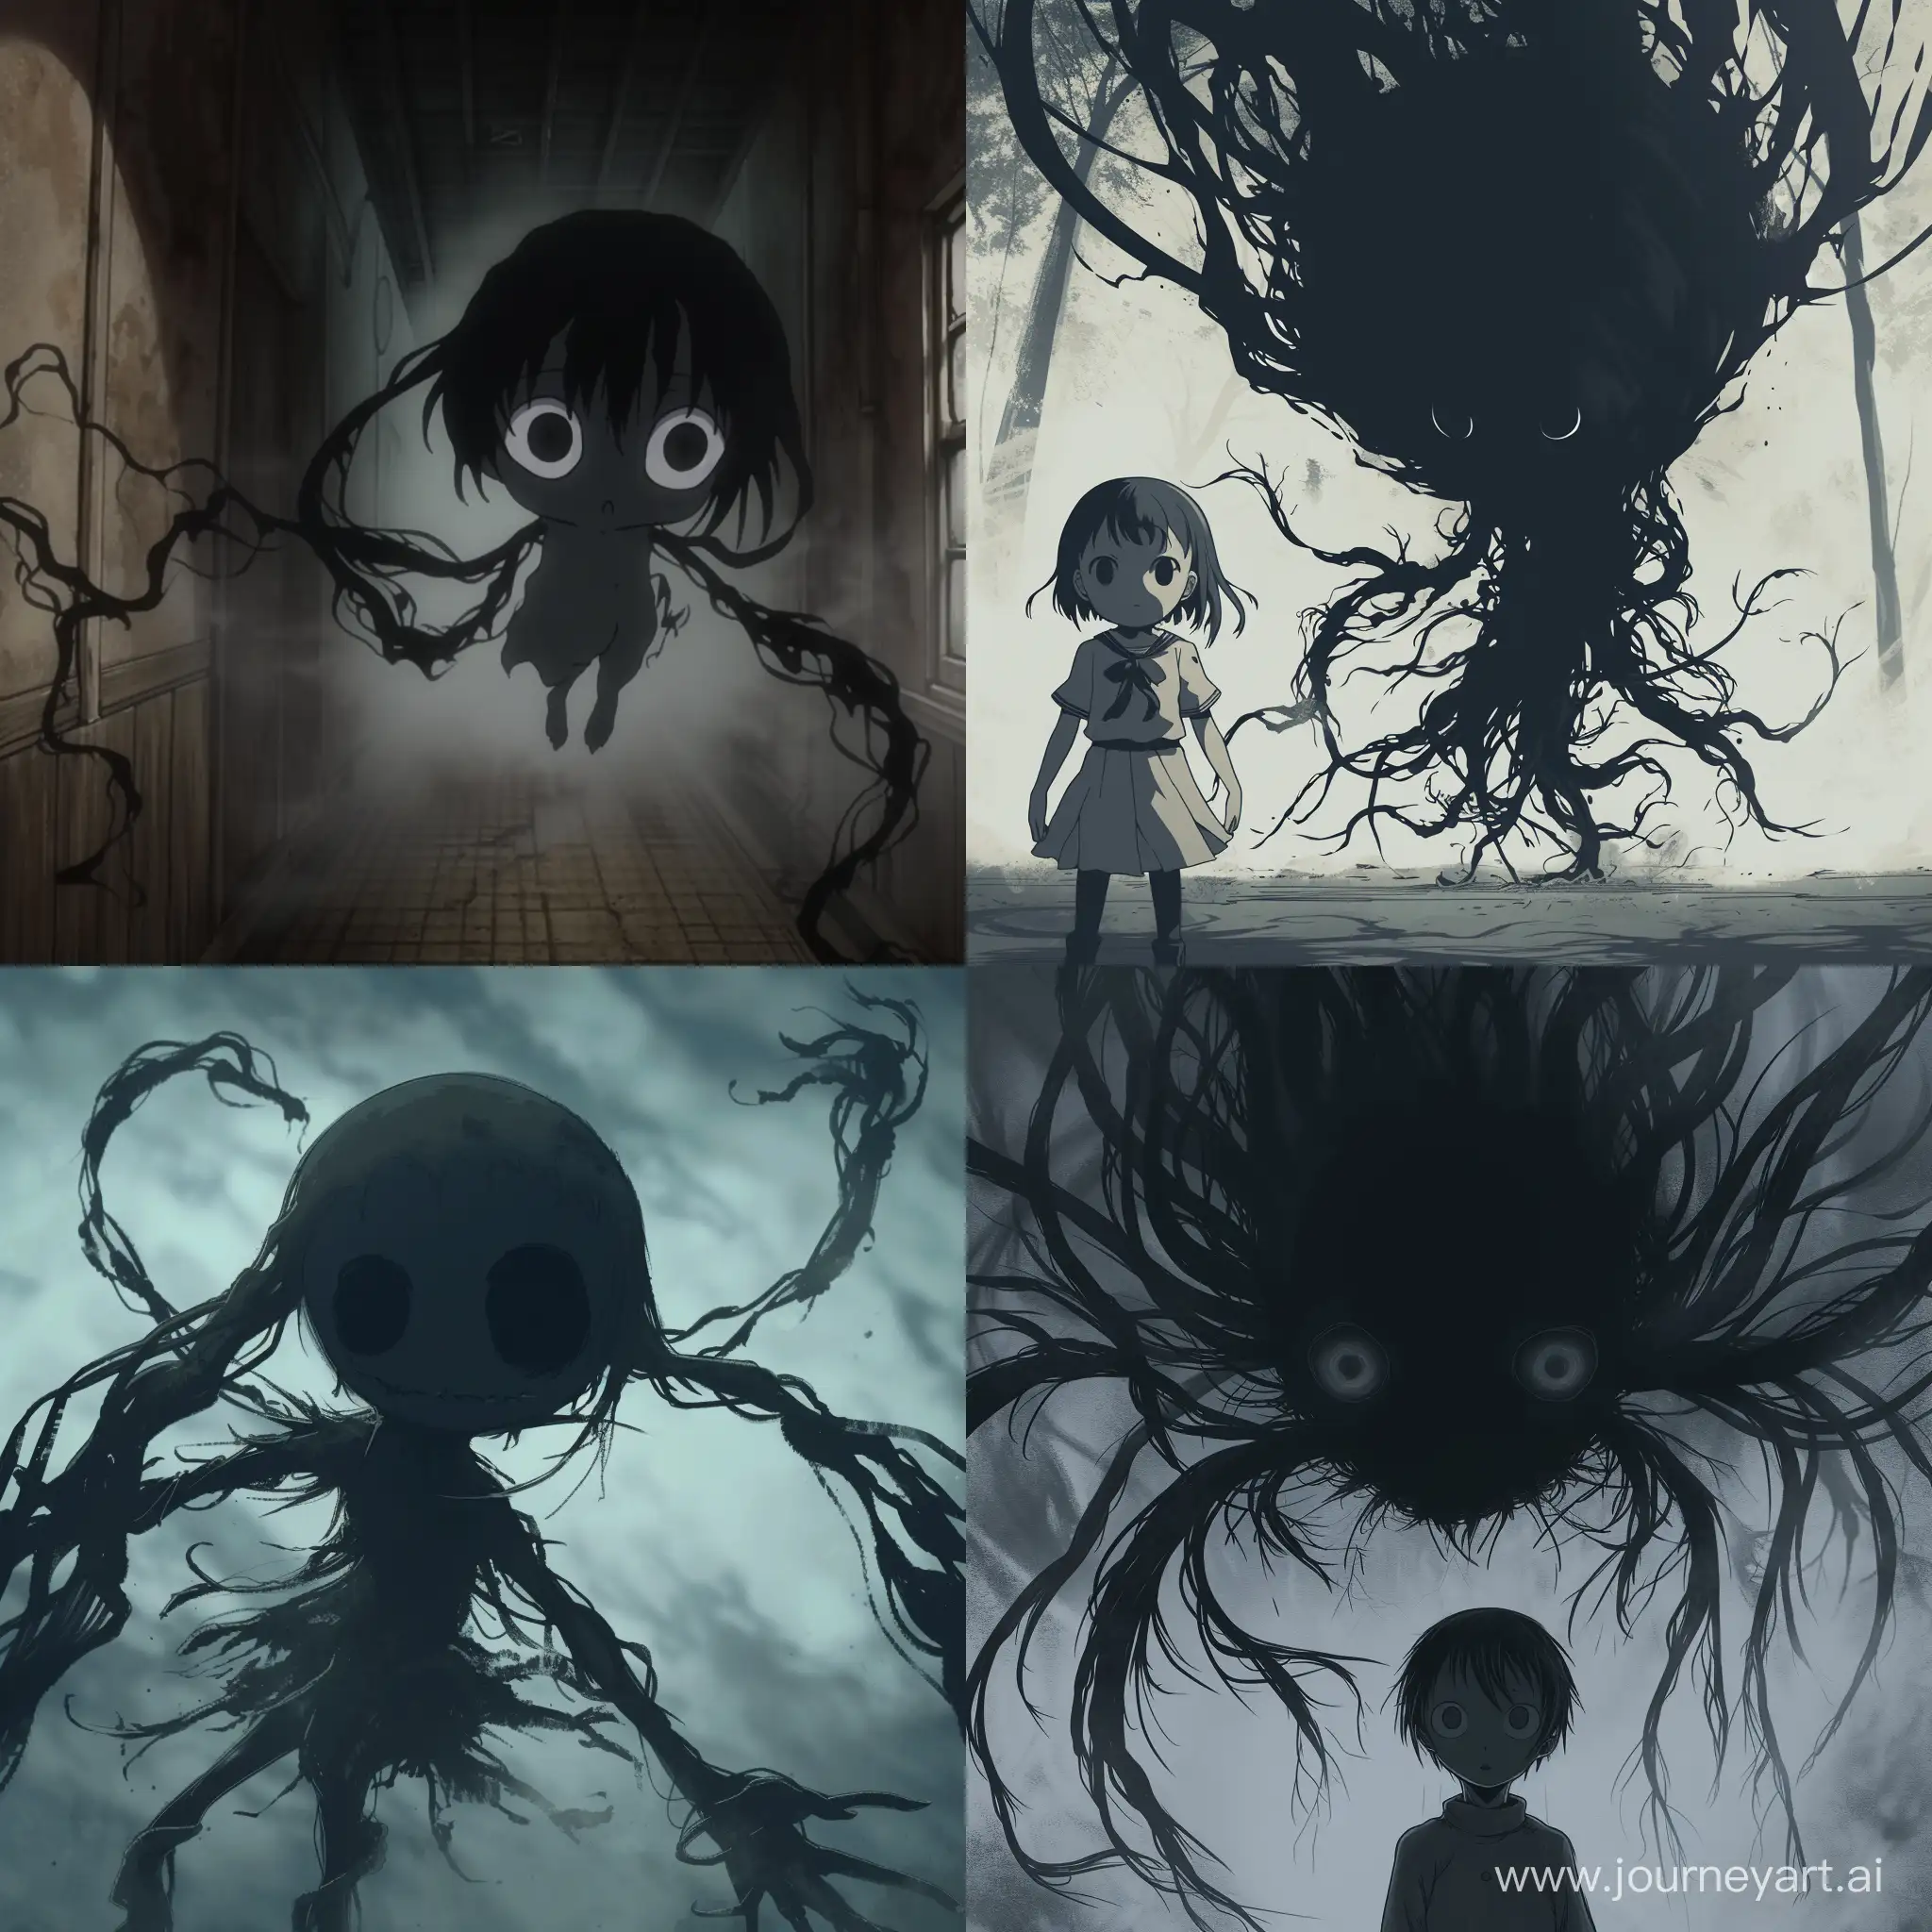 2D anime, the Shadow's child-like eyes, dark as the abyss, fixate on an unsuspecting target. With a swift, almost imperceptible movement, it extends its formless, shadowy tendrils towards the victim. The attack is swift and merciless, draining the life force from its prey with chilling efficiency. The Shadow, though in this diminutive form, exhibits a terrifying power, leaving behind nothing but a withered husk.